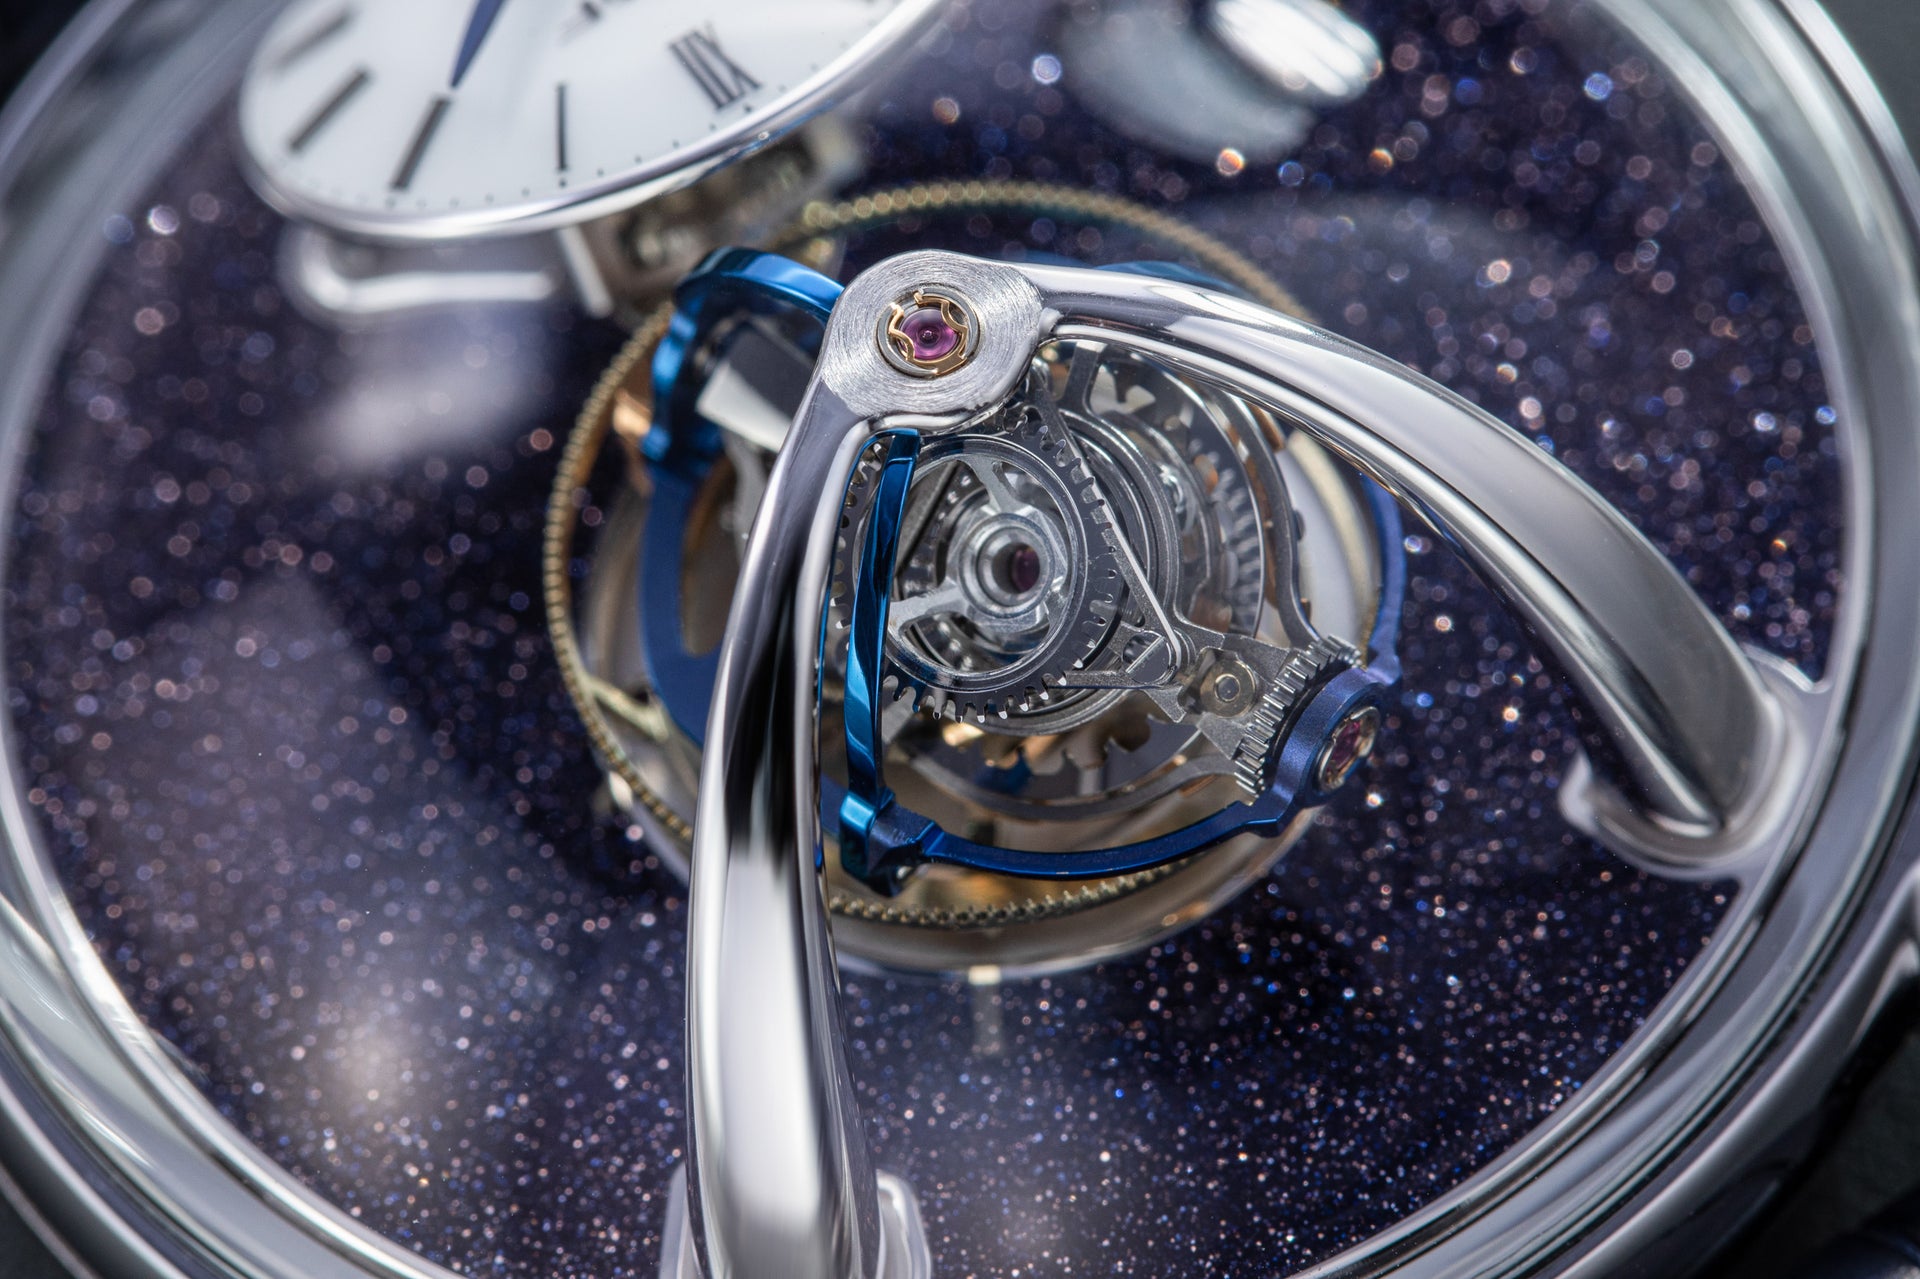 MB&F LM Thunderdome The Hour Glass Aventurine